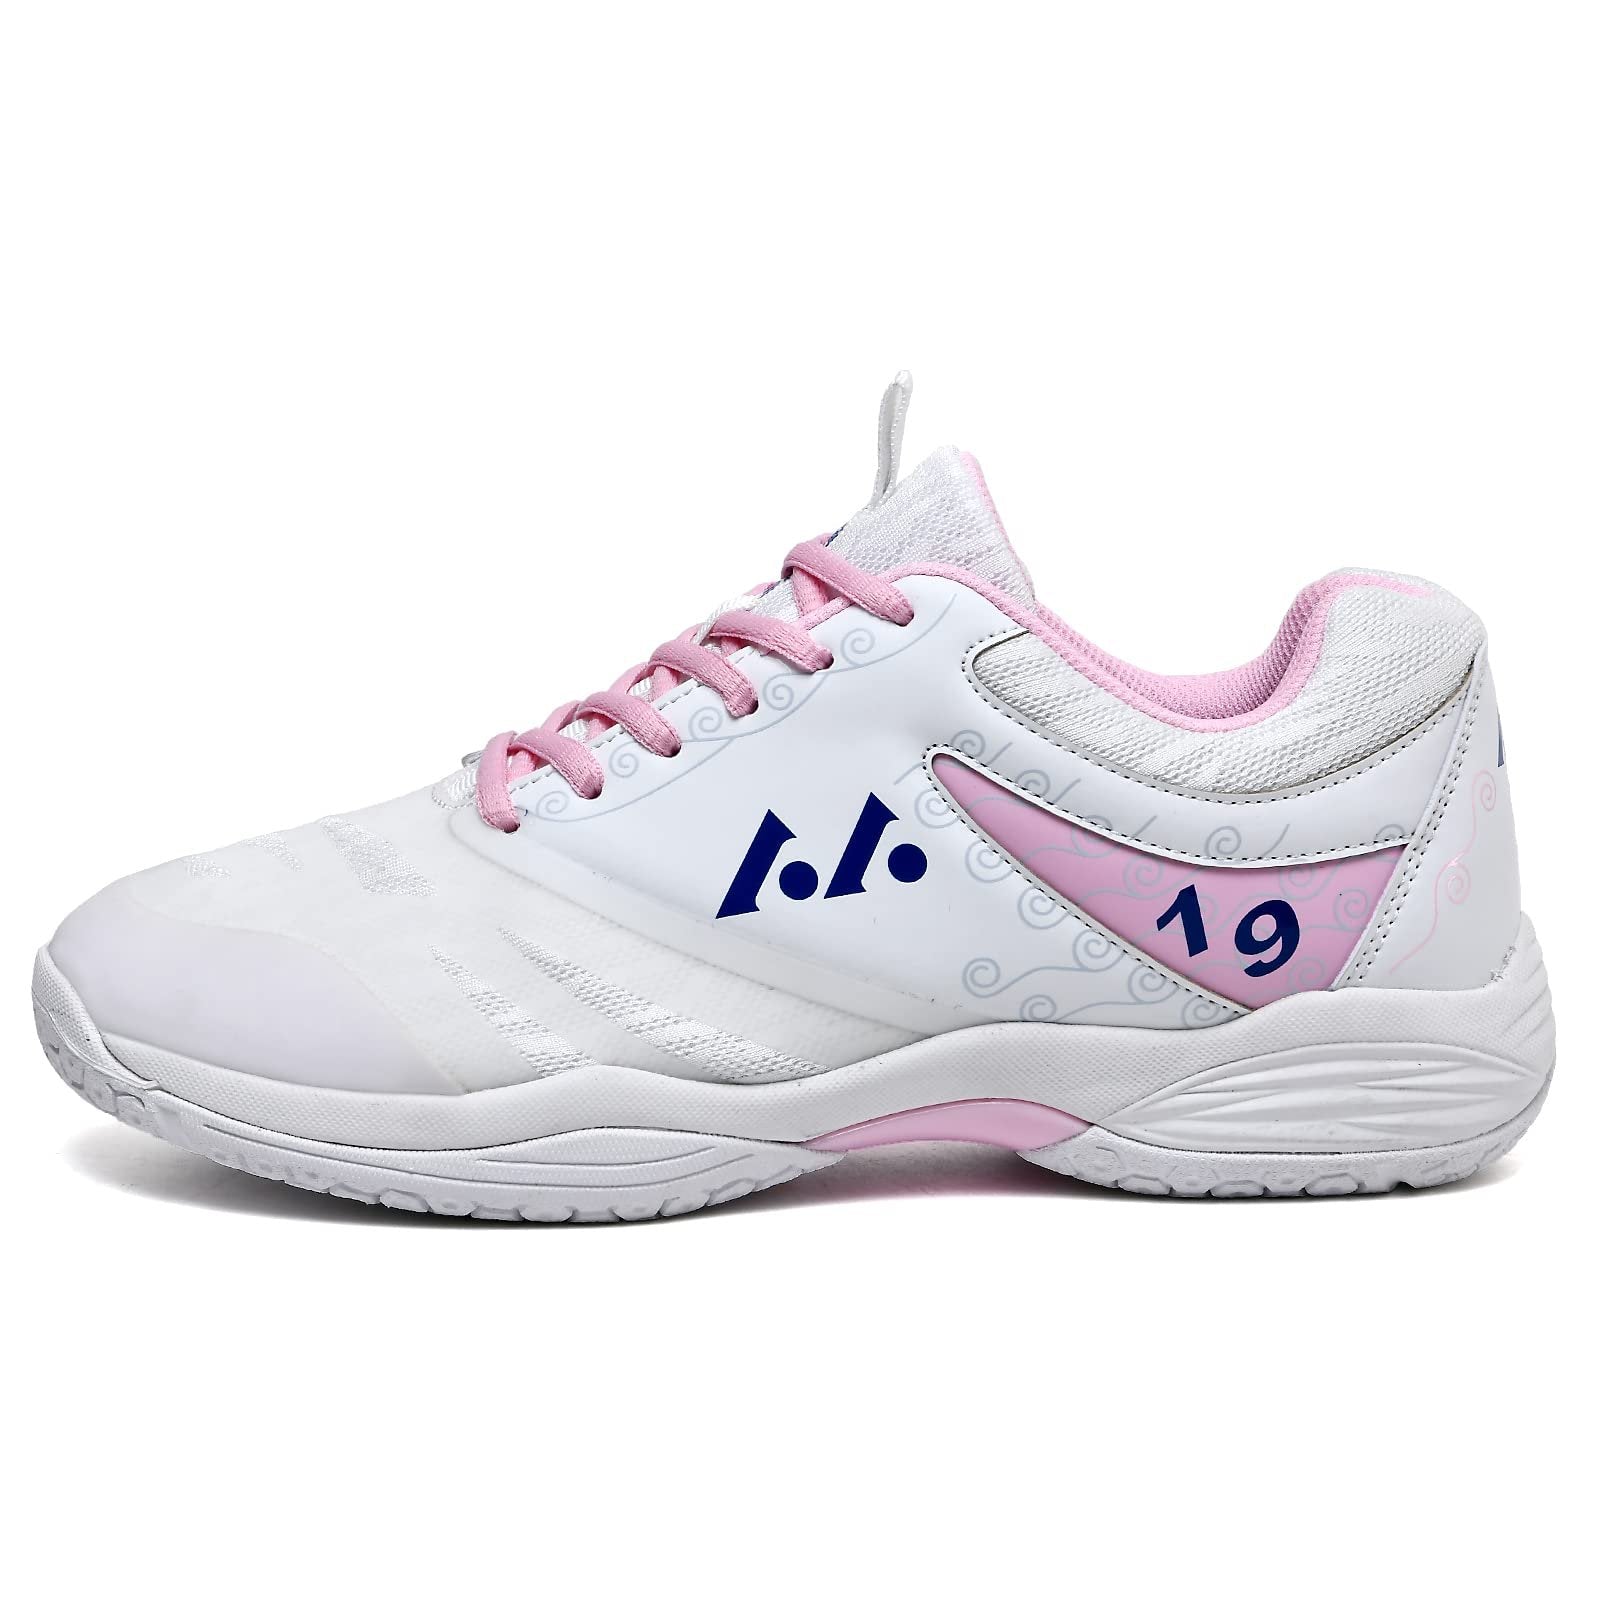 Womens Mens Lightweight Indoor Court Shoes Badminton Shoes for Pickleball, Tennis, Table Tennis, Volleyball (019 Pink, 37)